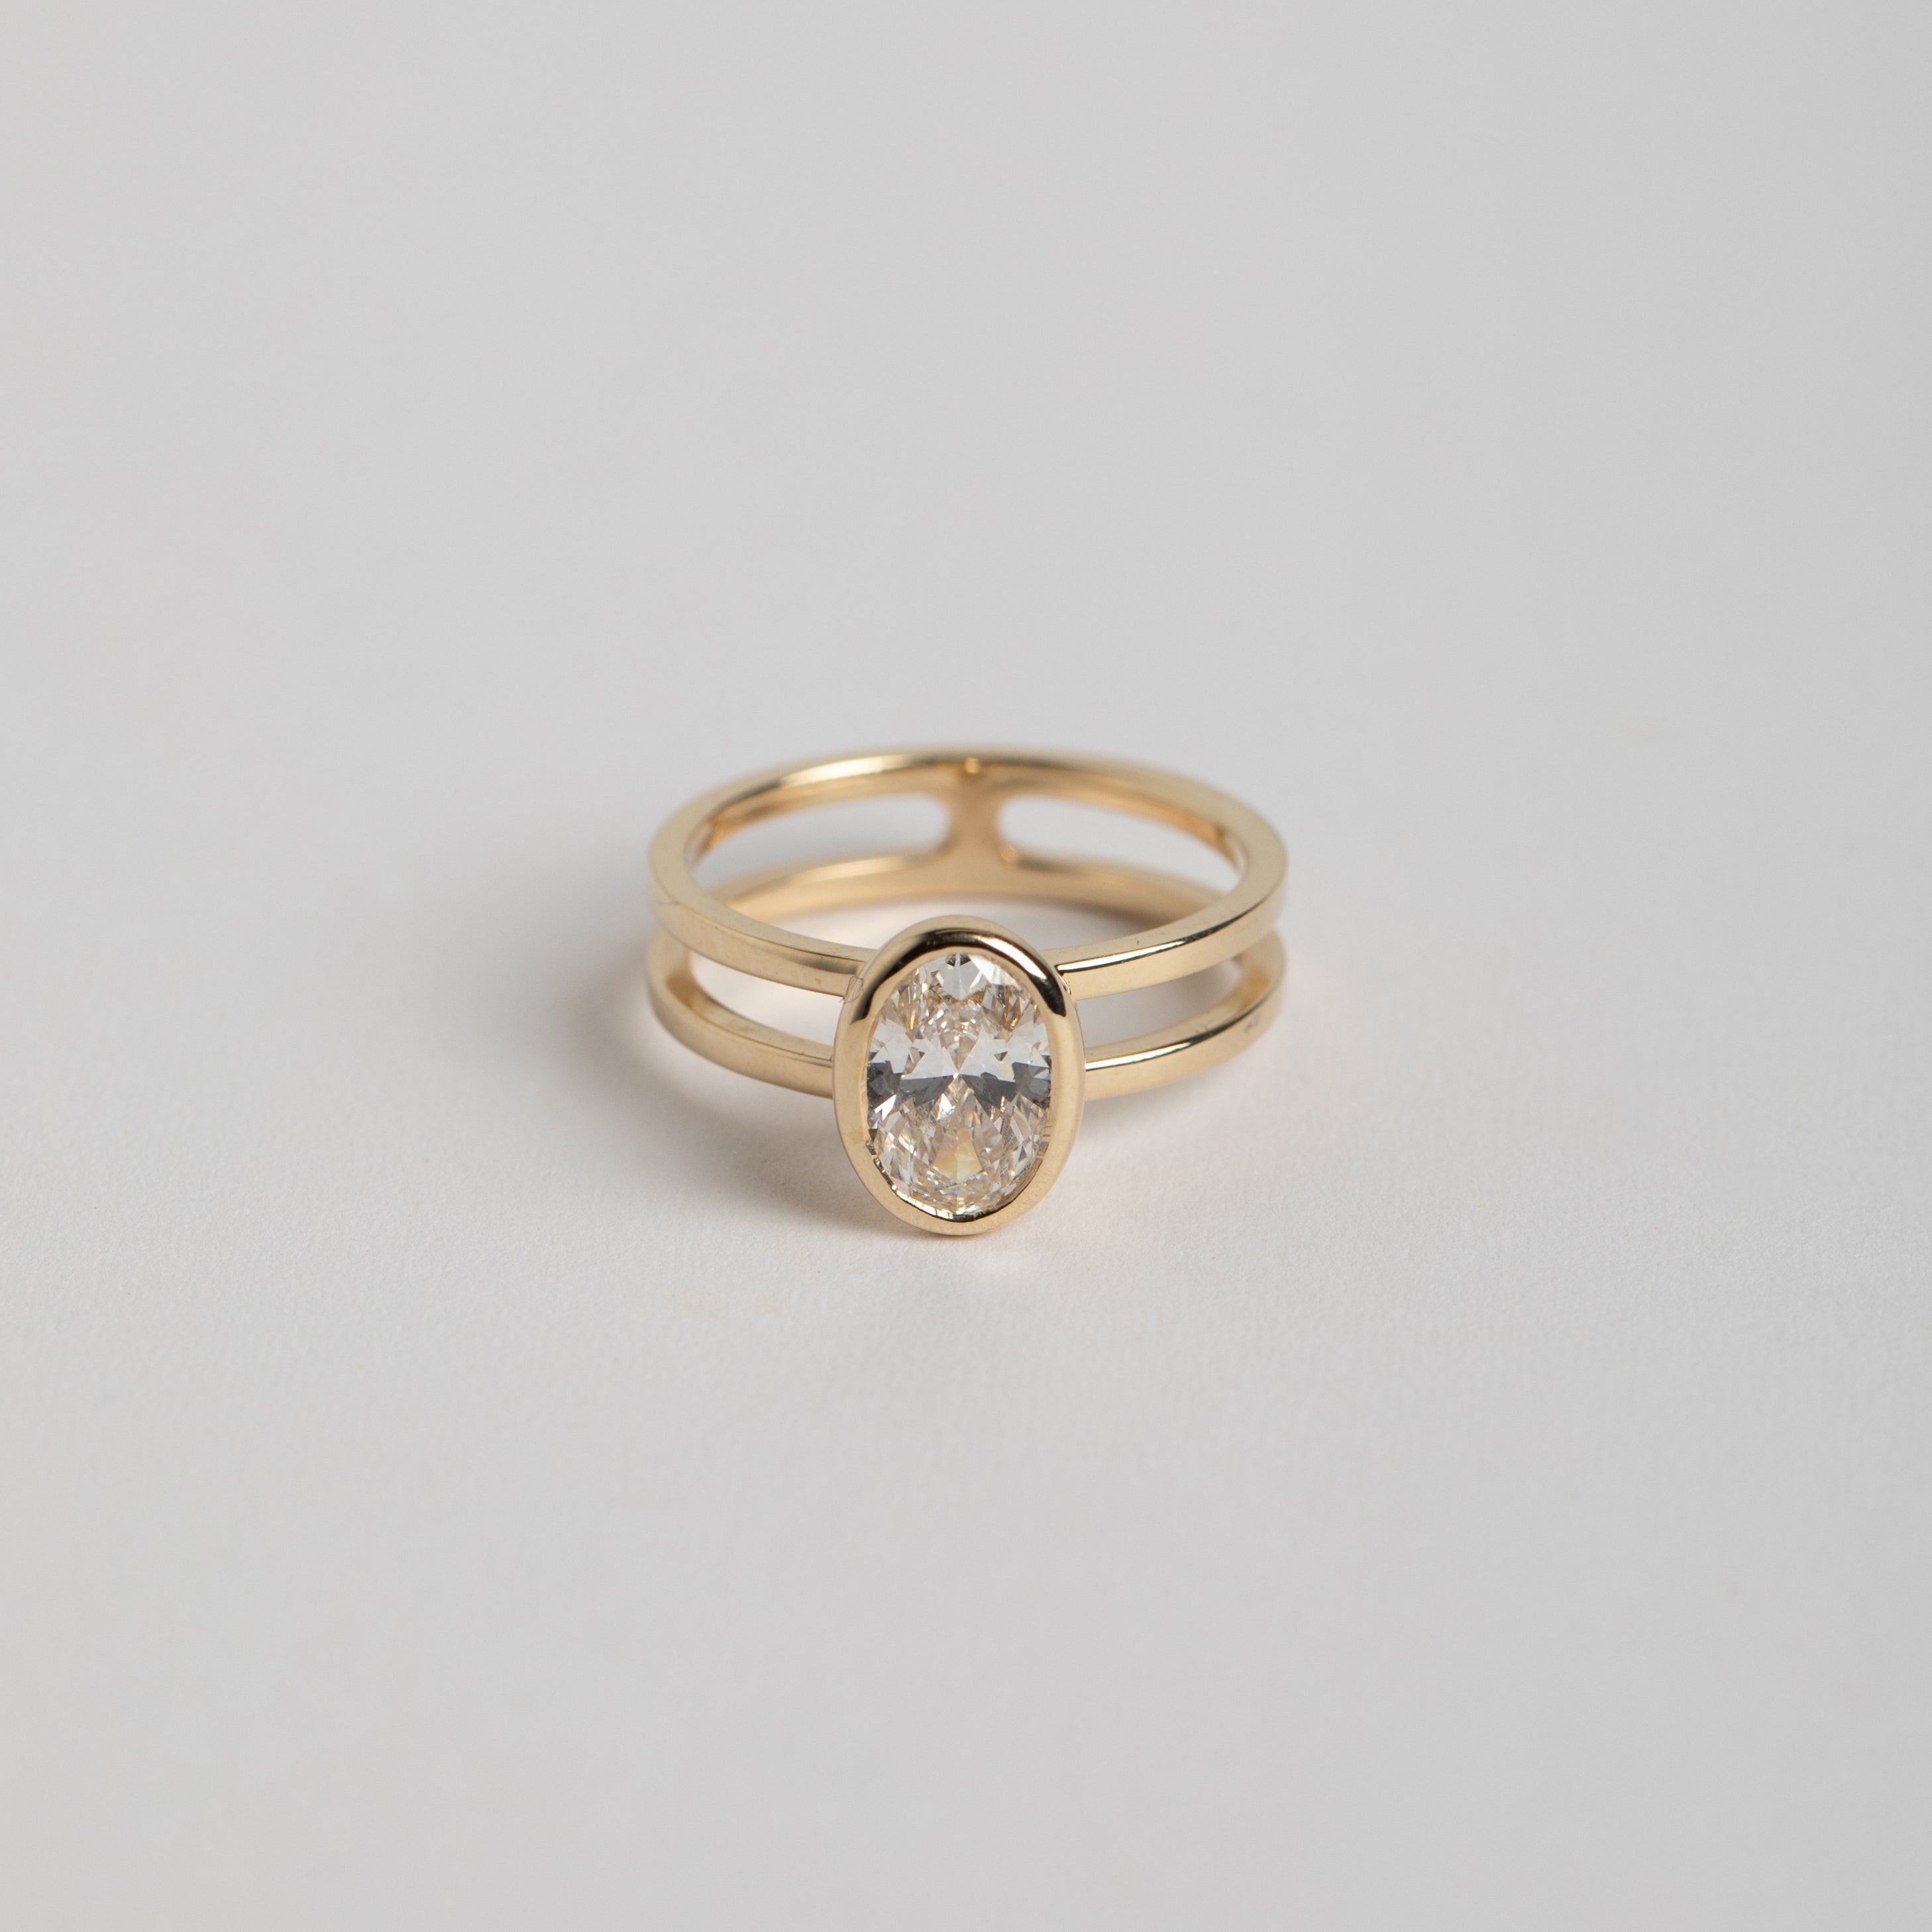 Designer Benu Ring in 14k gold set with a G VS1 1.17ct lab-created diamond made in NYC by SHW fine Jewelry